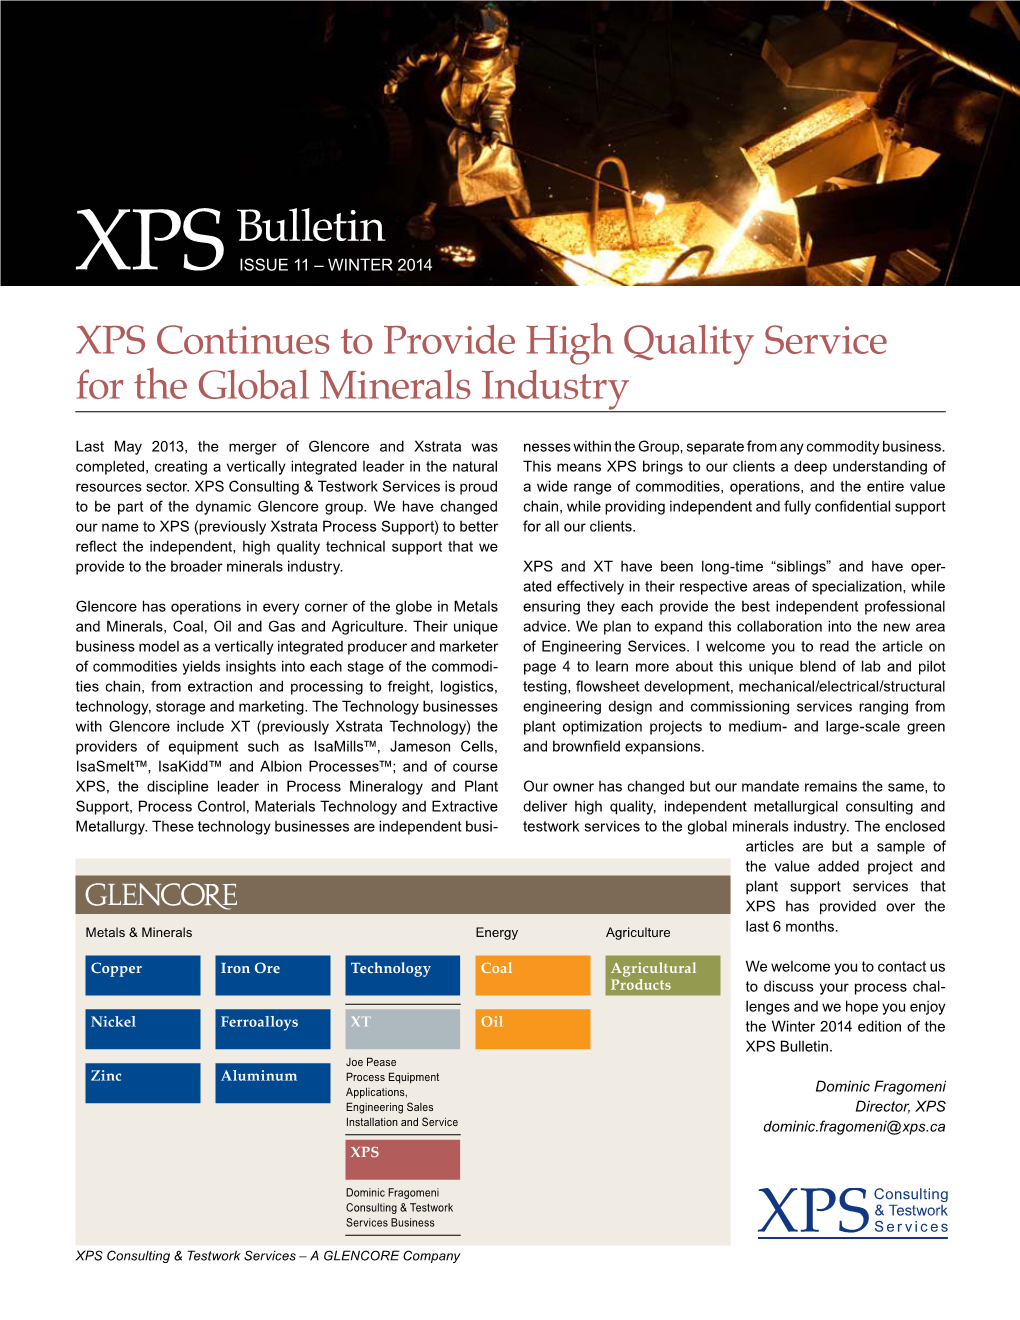 XPS Bulletin Issue 11